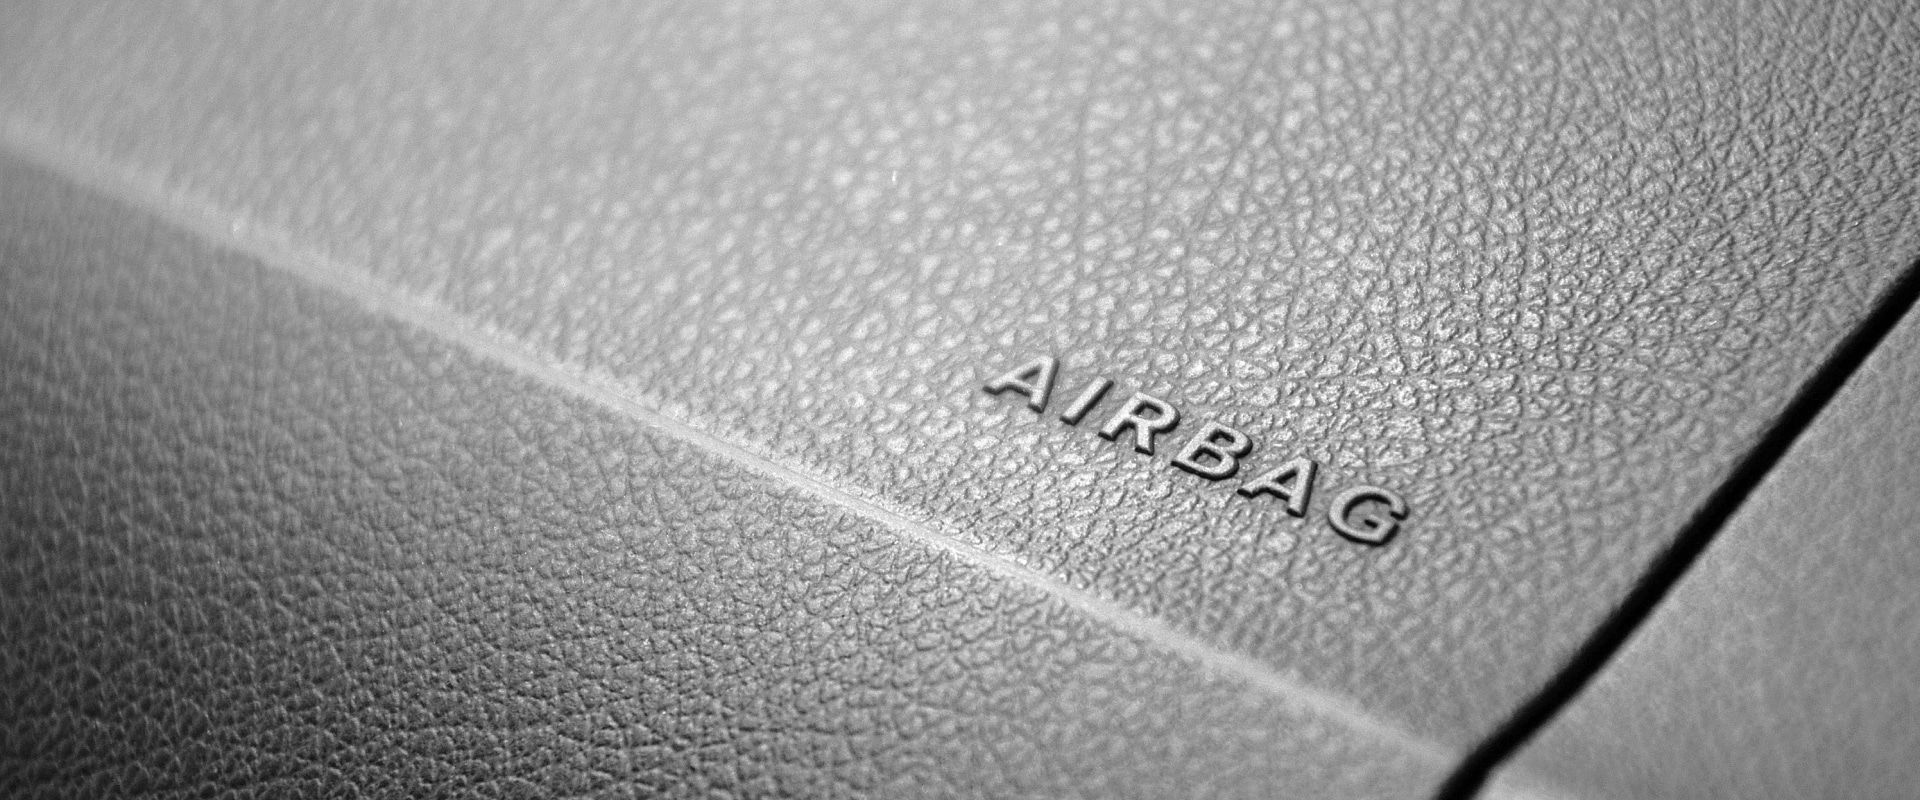 Is It Possible To Restore A Deployed Airbag Following A Crash?